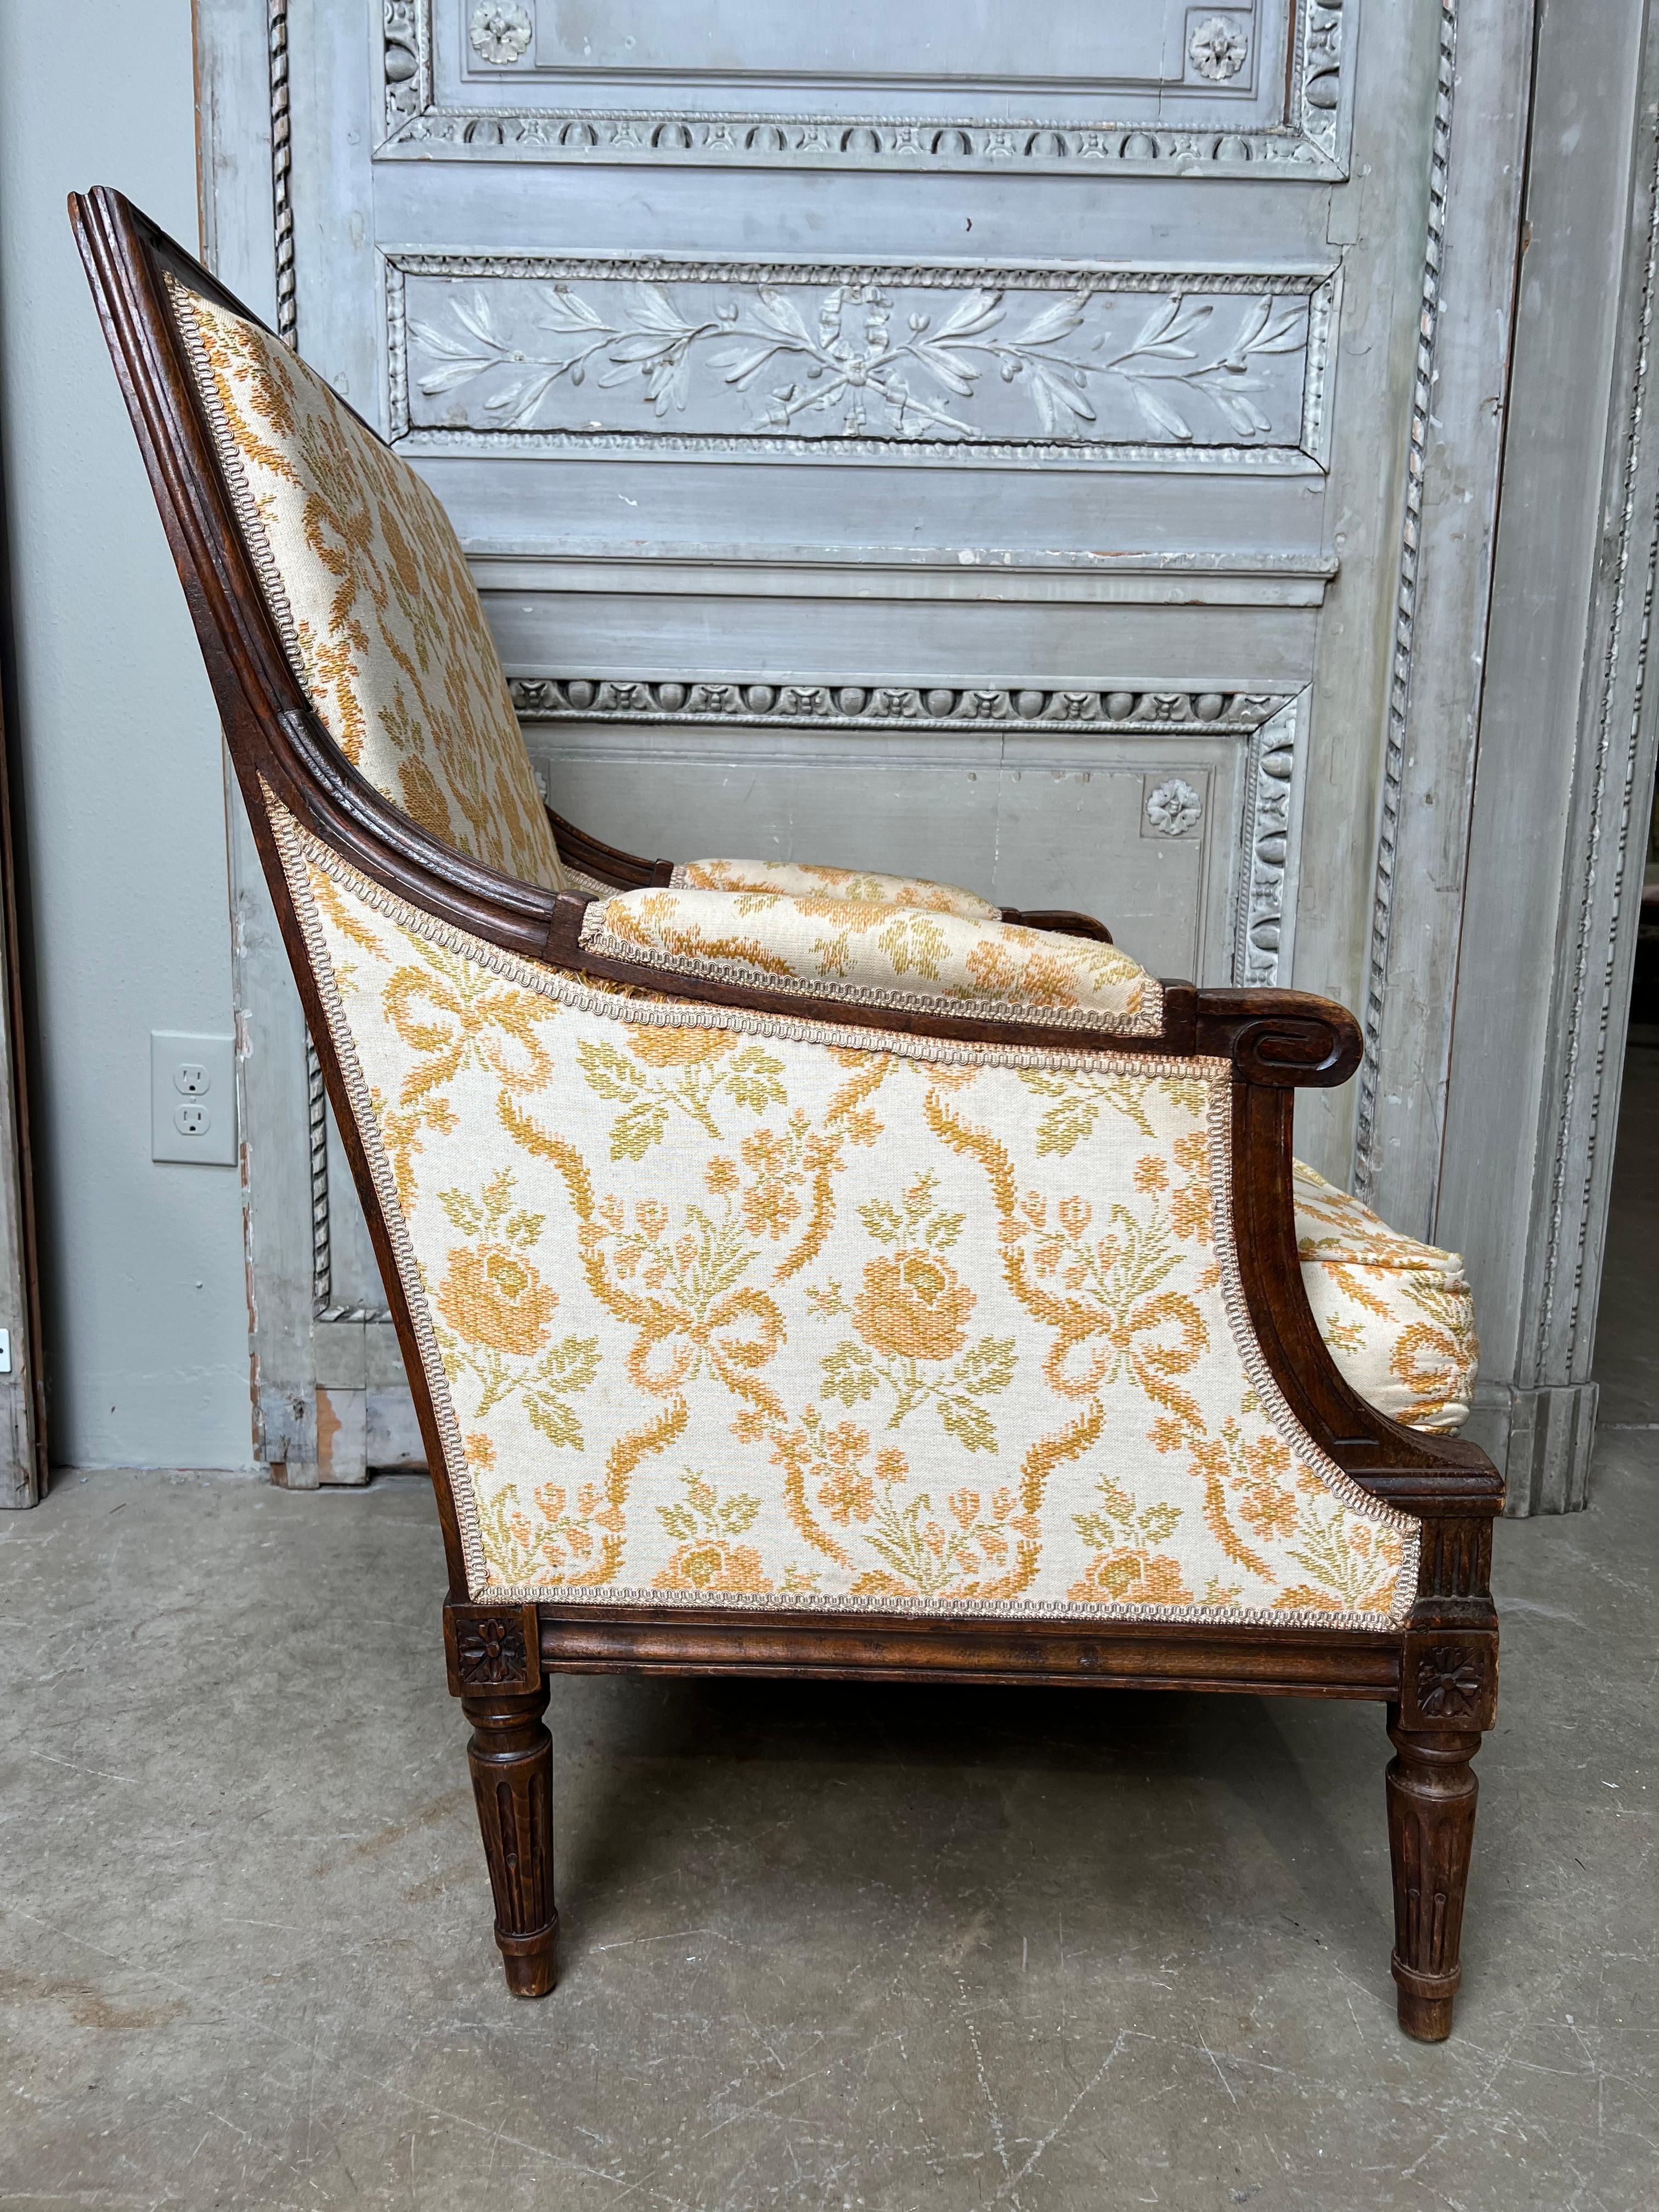 A large scale French carved wood Louis XVI style bergere chair.  
This comfortable armchair is very decorative and functional, it is pegged together and very strong, the upholstery is old and can be replaced.  